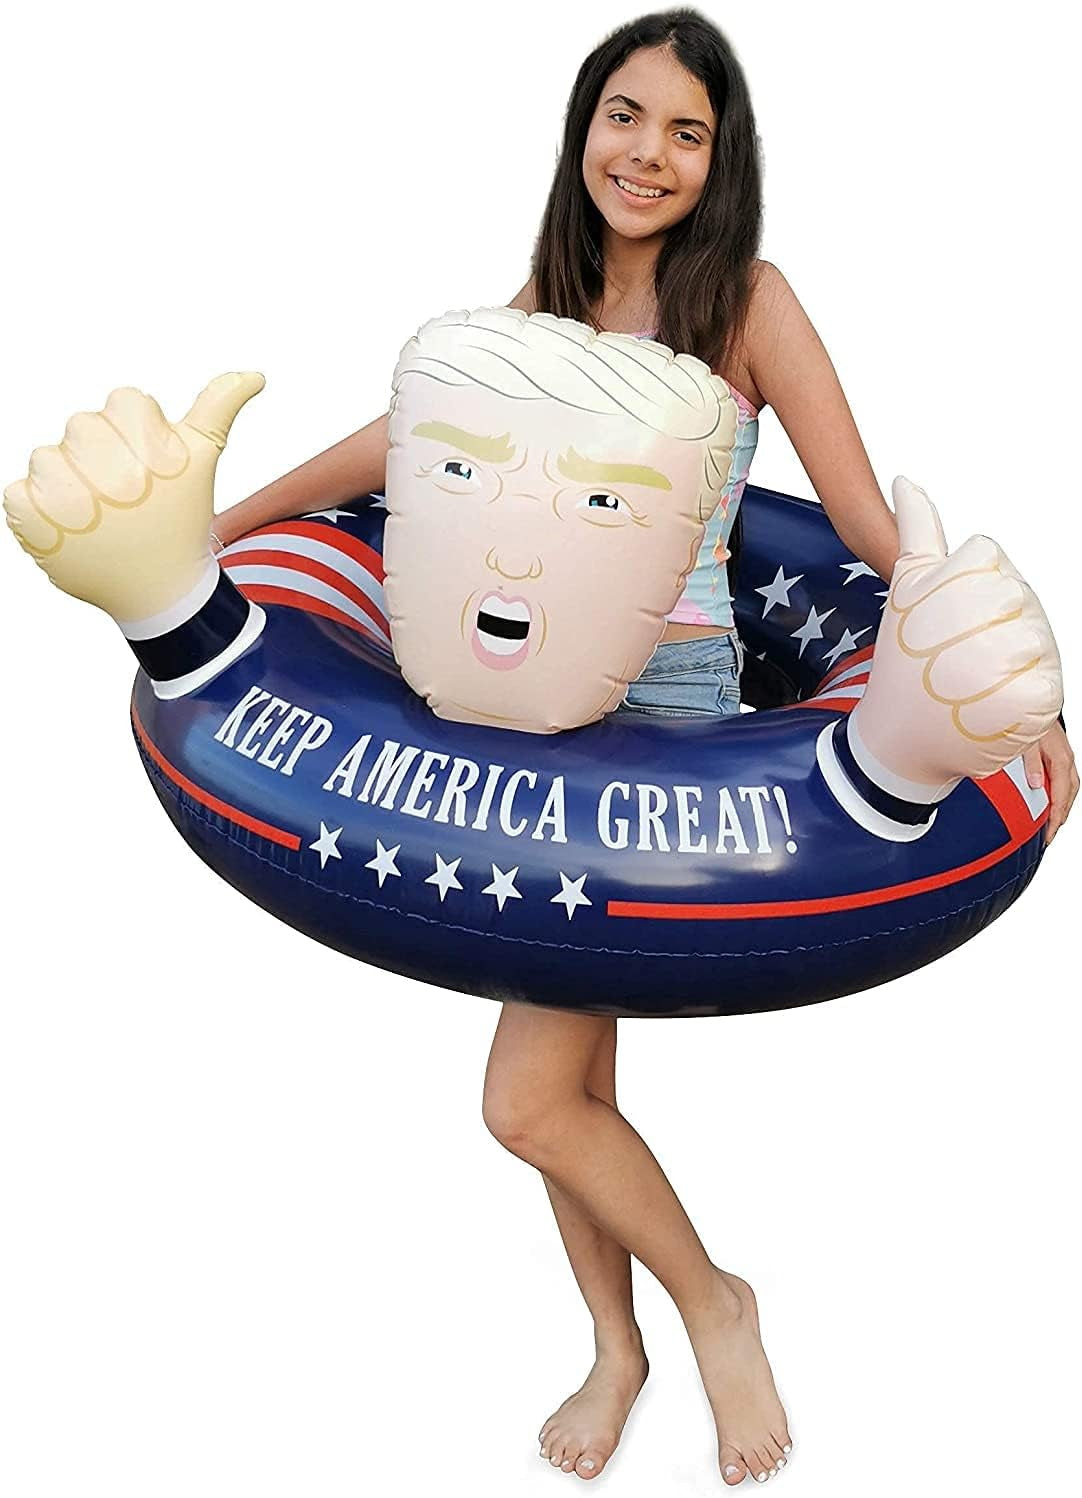 Keep America Great! Huge Hit Pool Float for Summer 2020, Re-Election Presidential Floats Inflatable Ring Swimming Tube